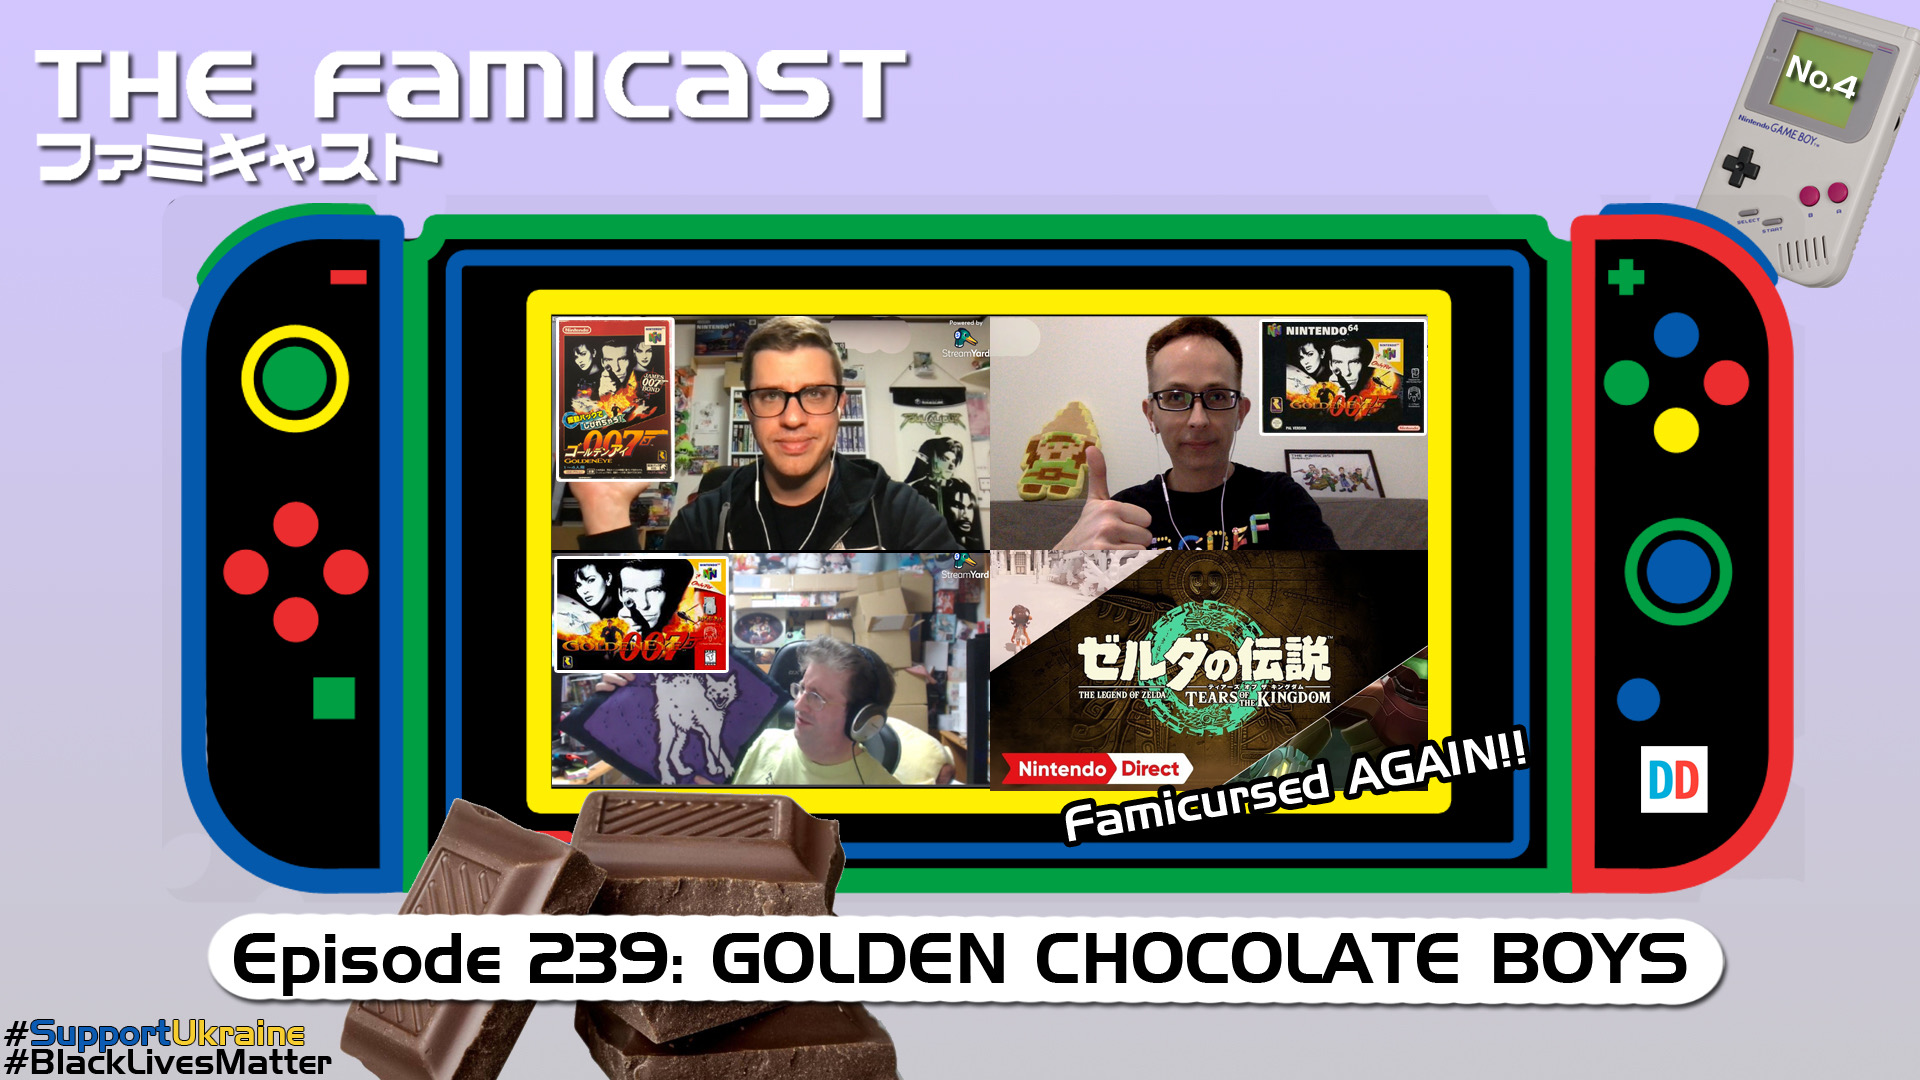 The Famicast 239 - GOLDEN CHOCOLATE BOYS